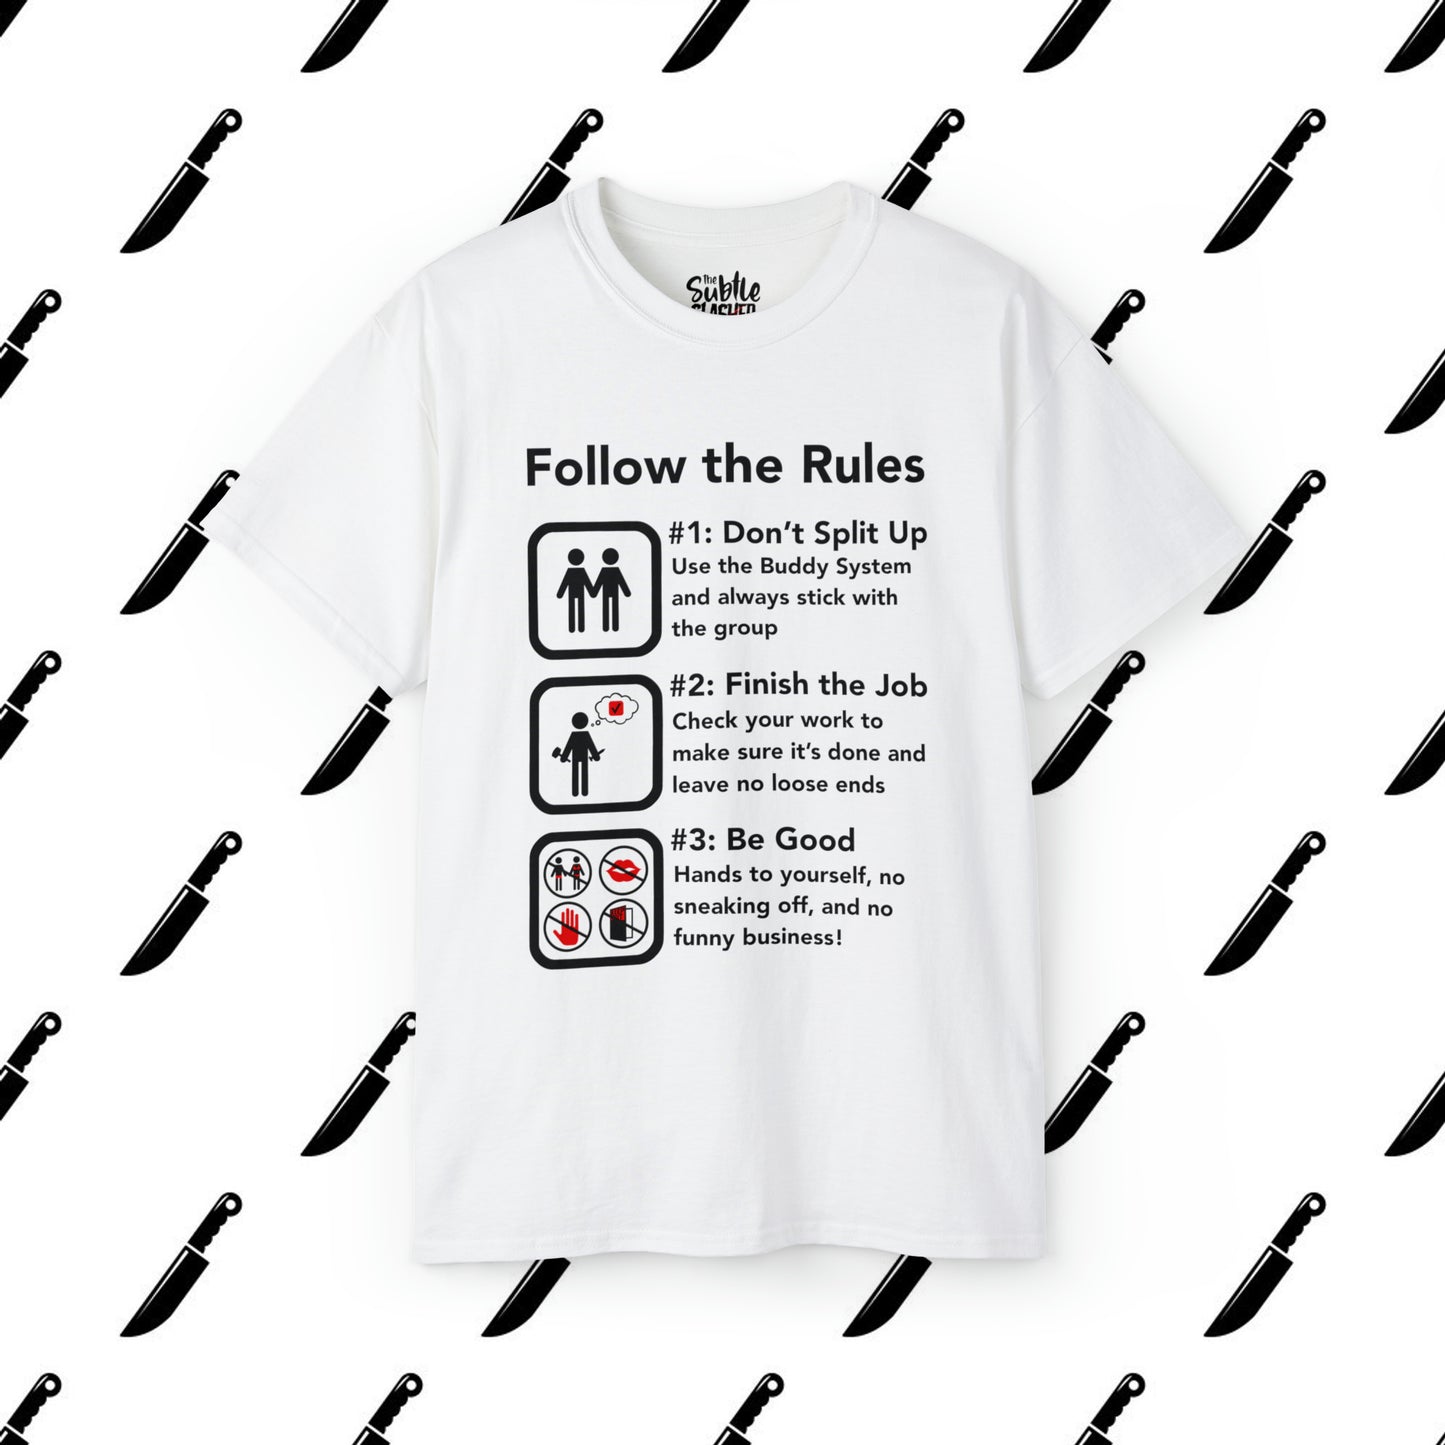 The Rules Tee